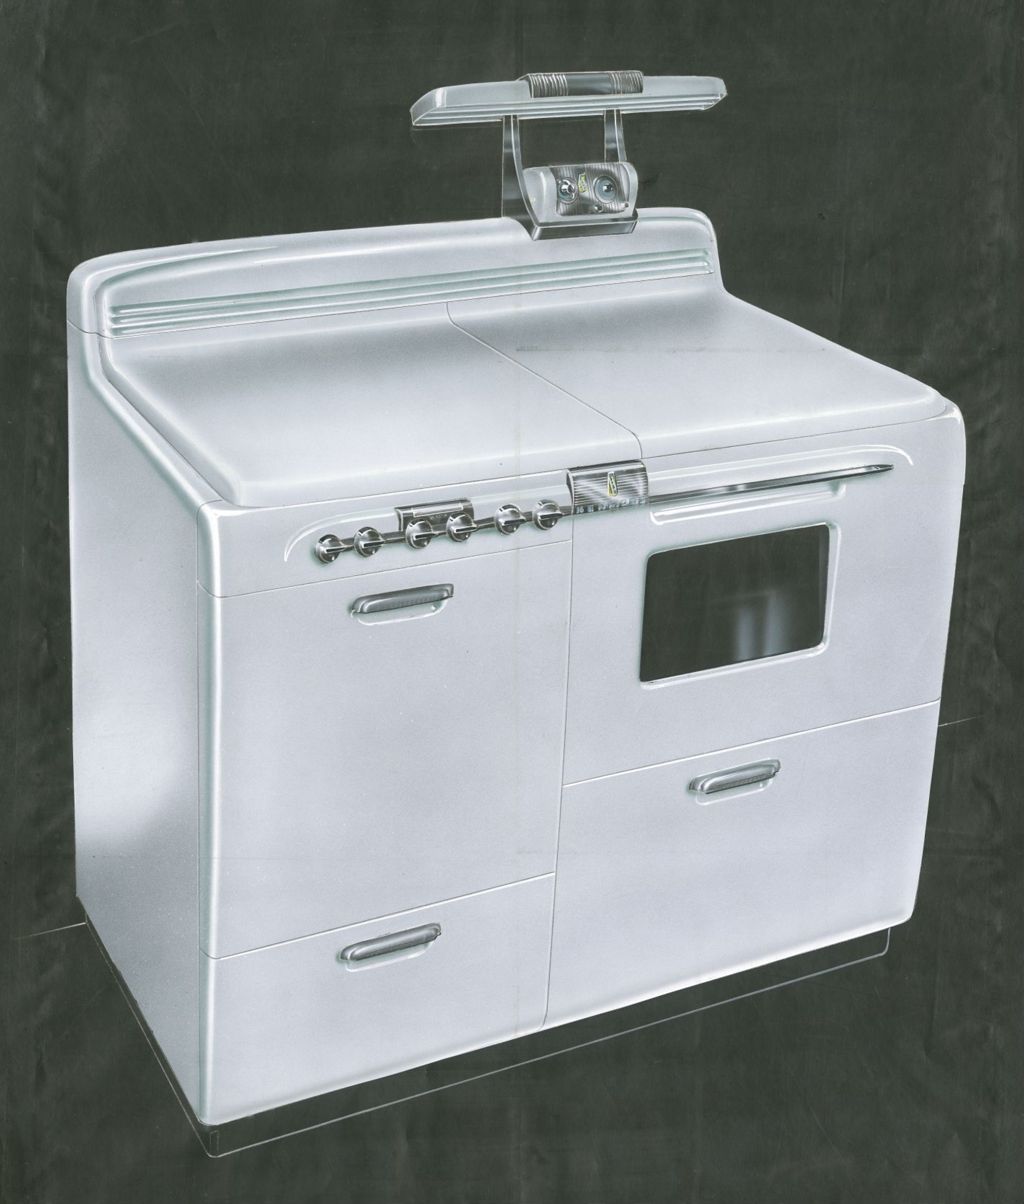 Miniature of Kenmore washer and dryer